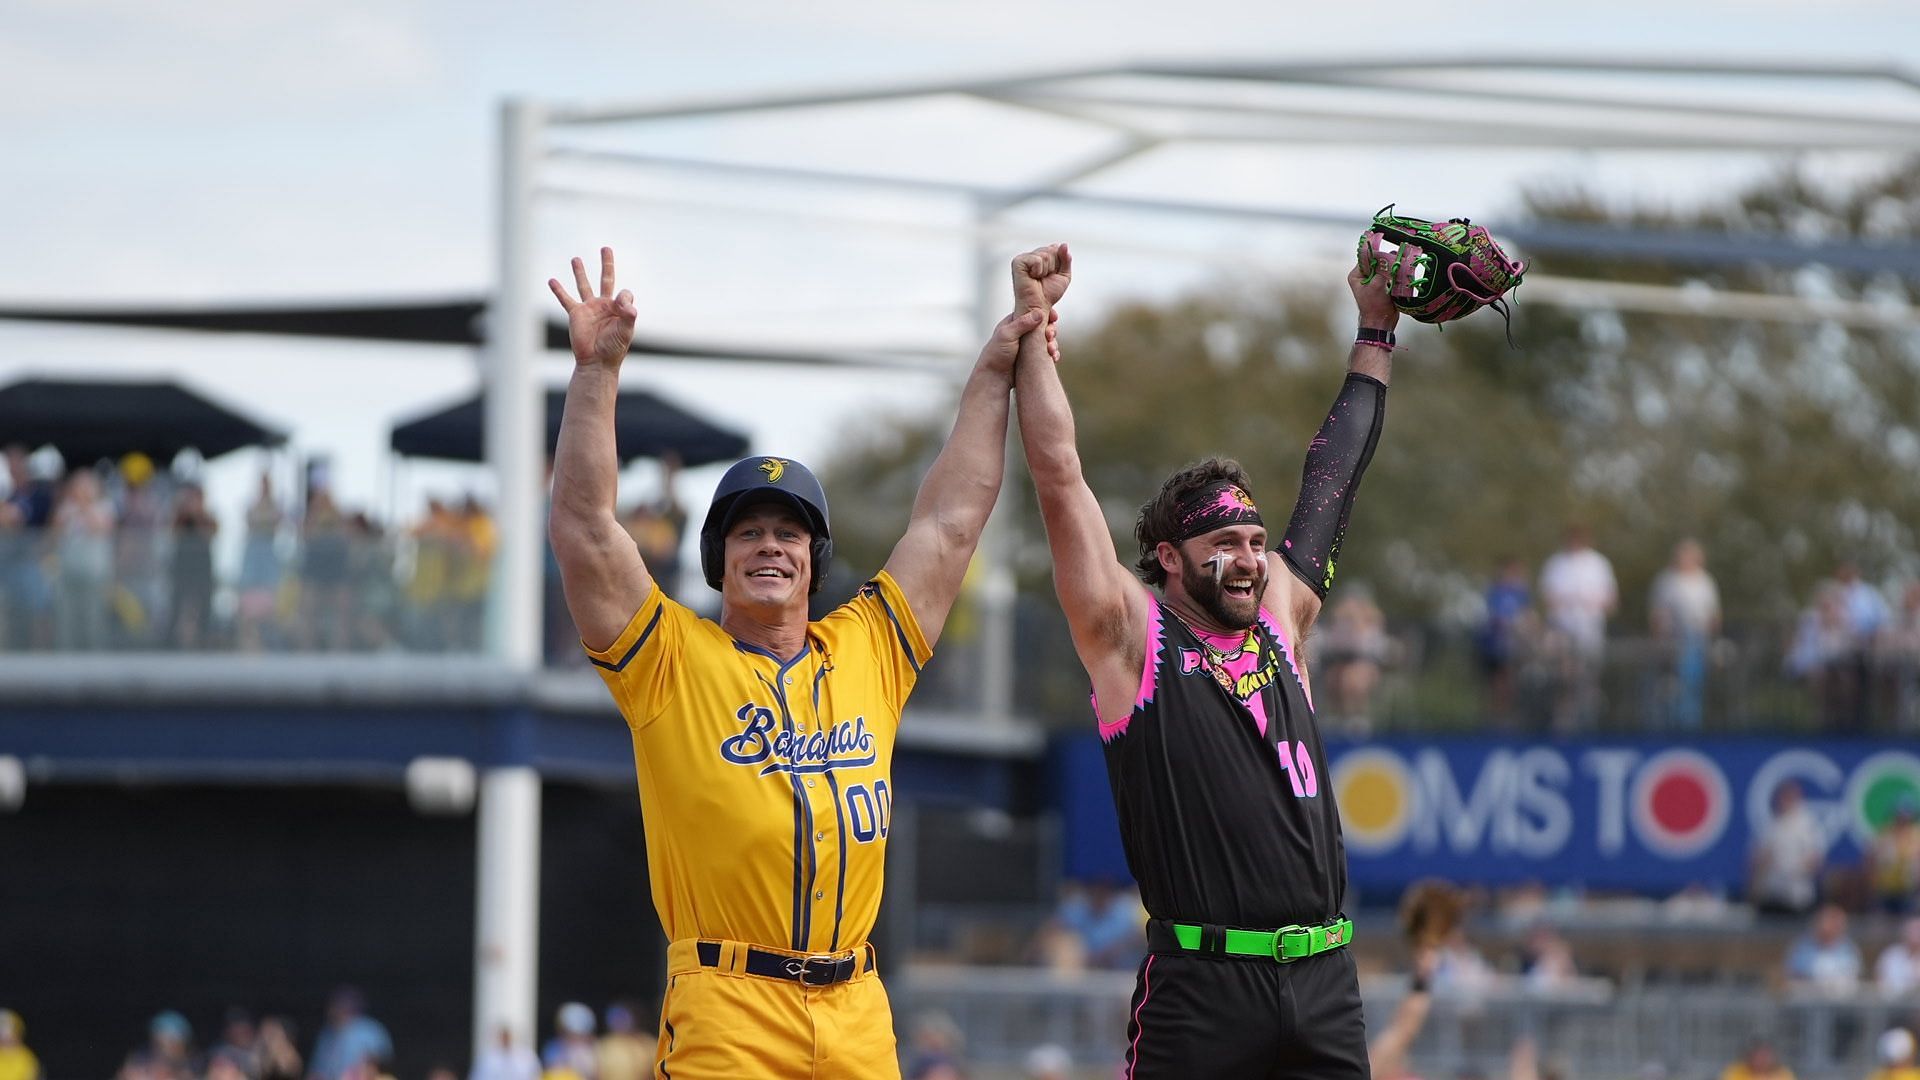 John Cena congratulating the pitcher after his strikeout playing for the Savannah Bananas on Saturday